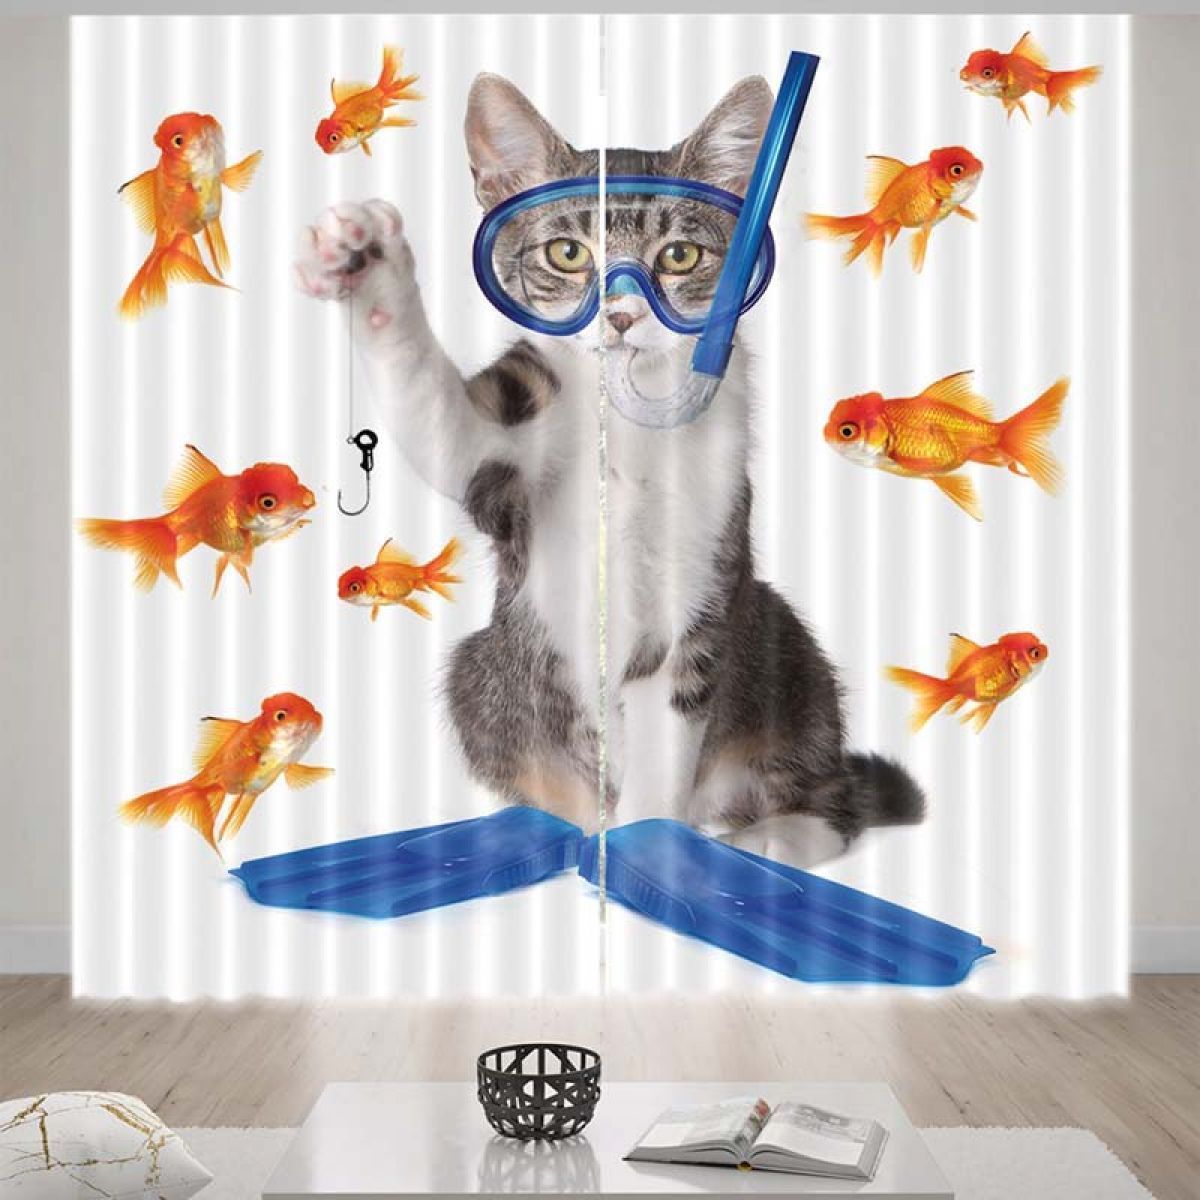 Cat And Goldfishes Printed Window Curtain Home Decor